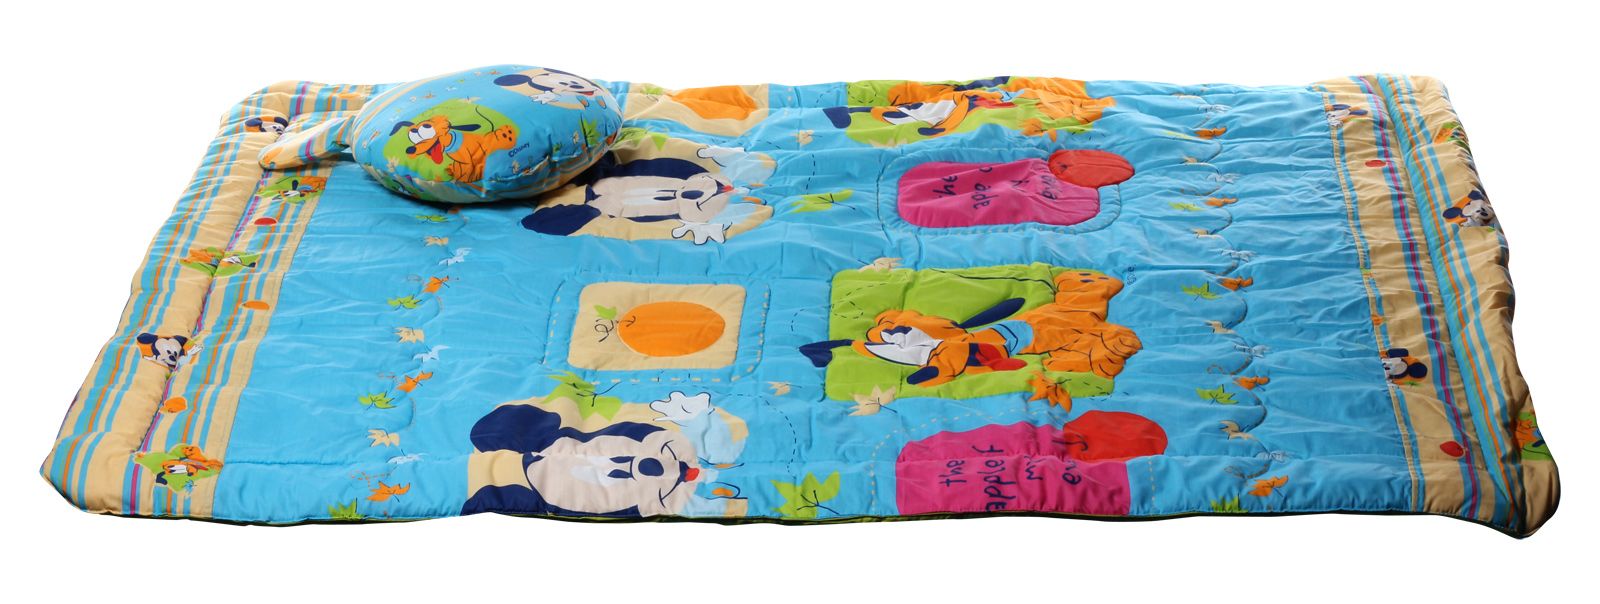 Sunbaby - Disney - Quilt with Pillow